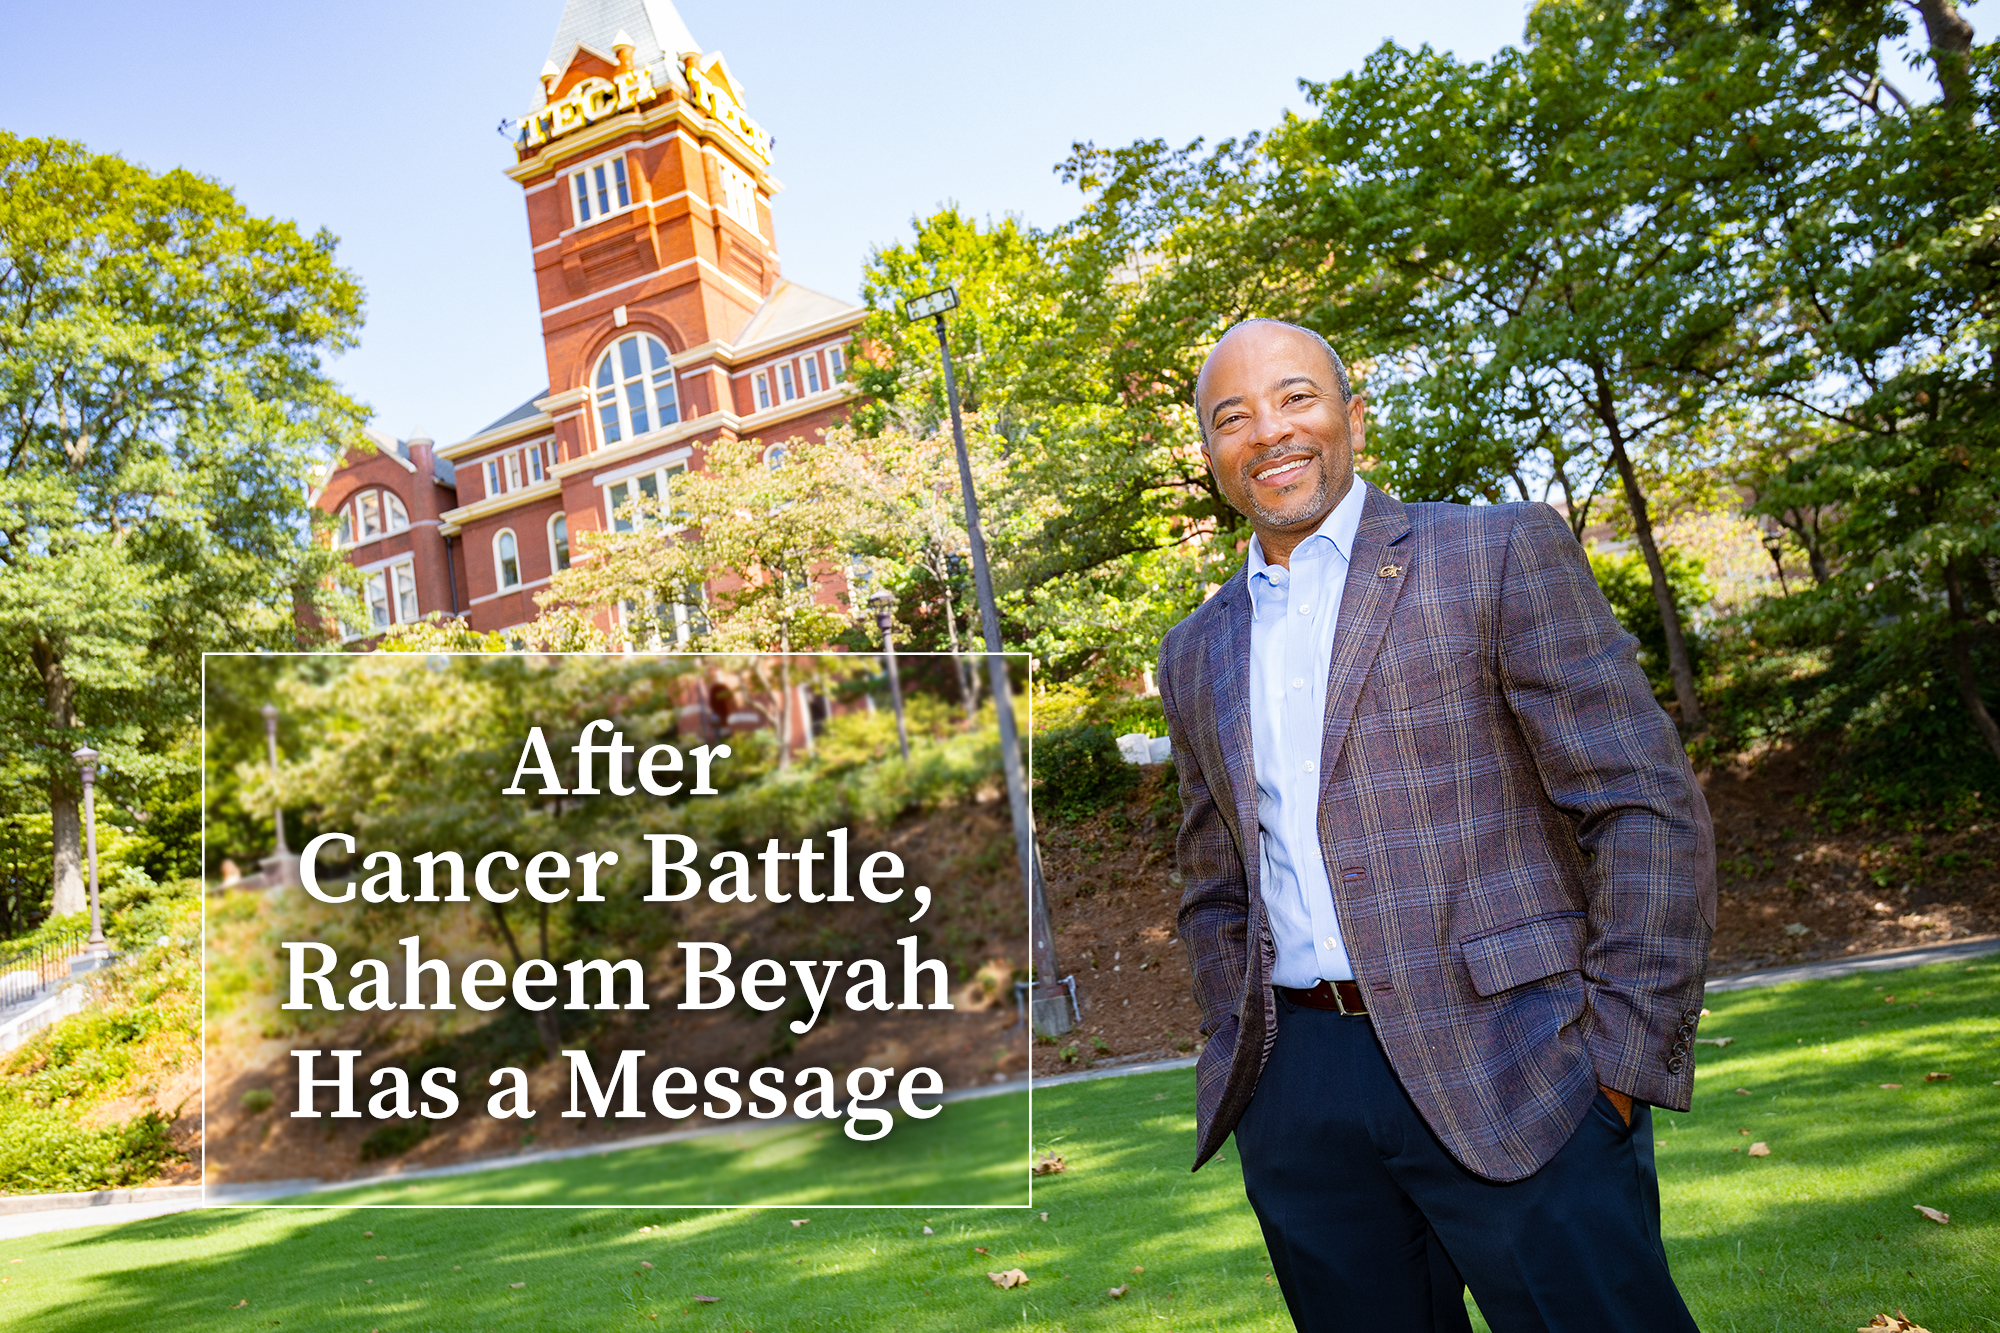 Raheem Beyah stands on the Tech Lawn with Tech Tower in the background. Text reads "After Cancer Battle, Raheem Beyah Has a Message"